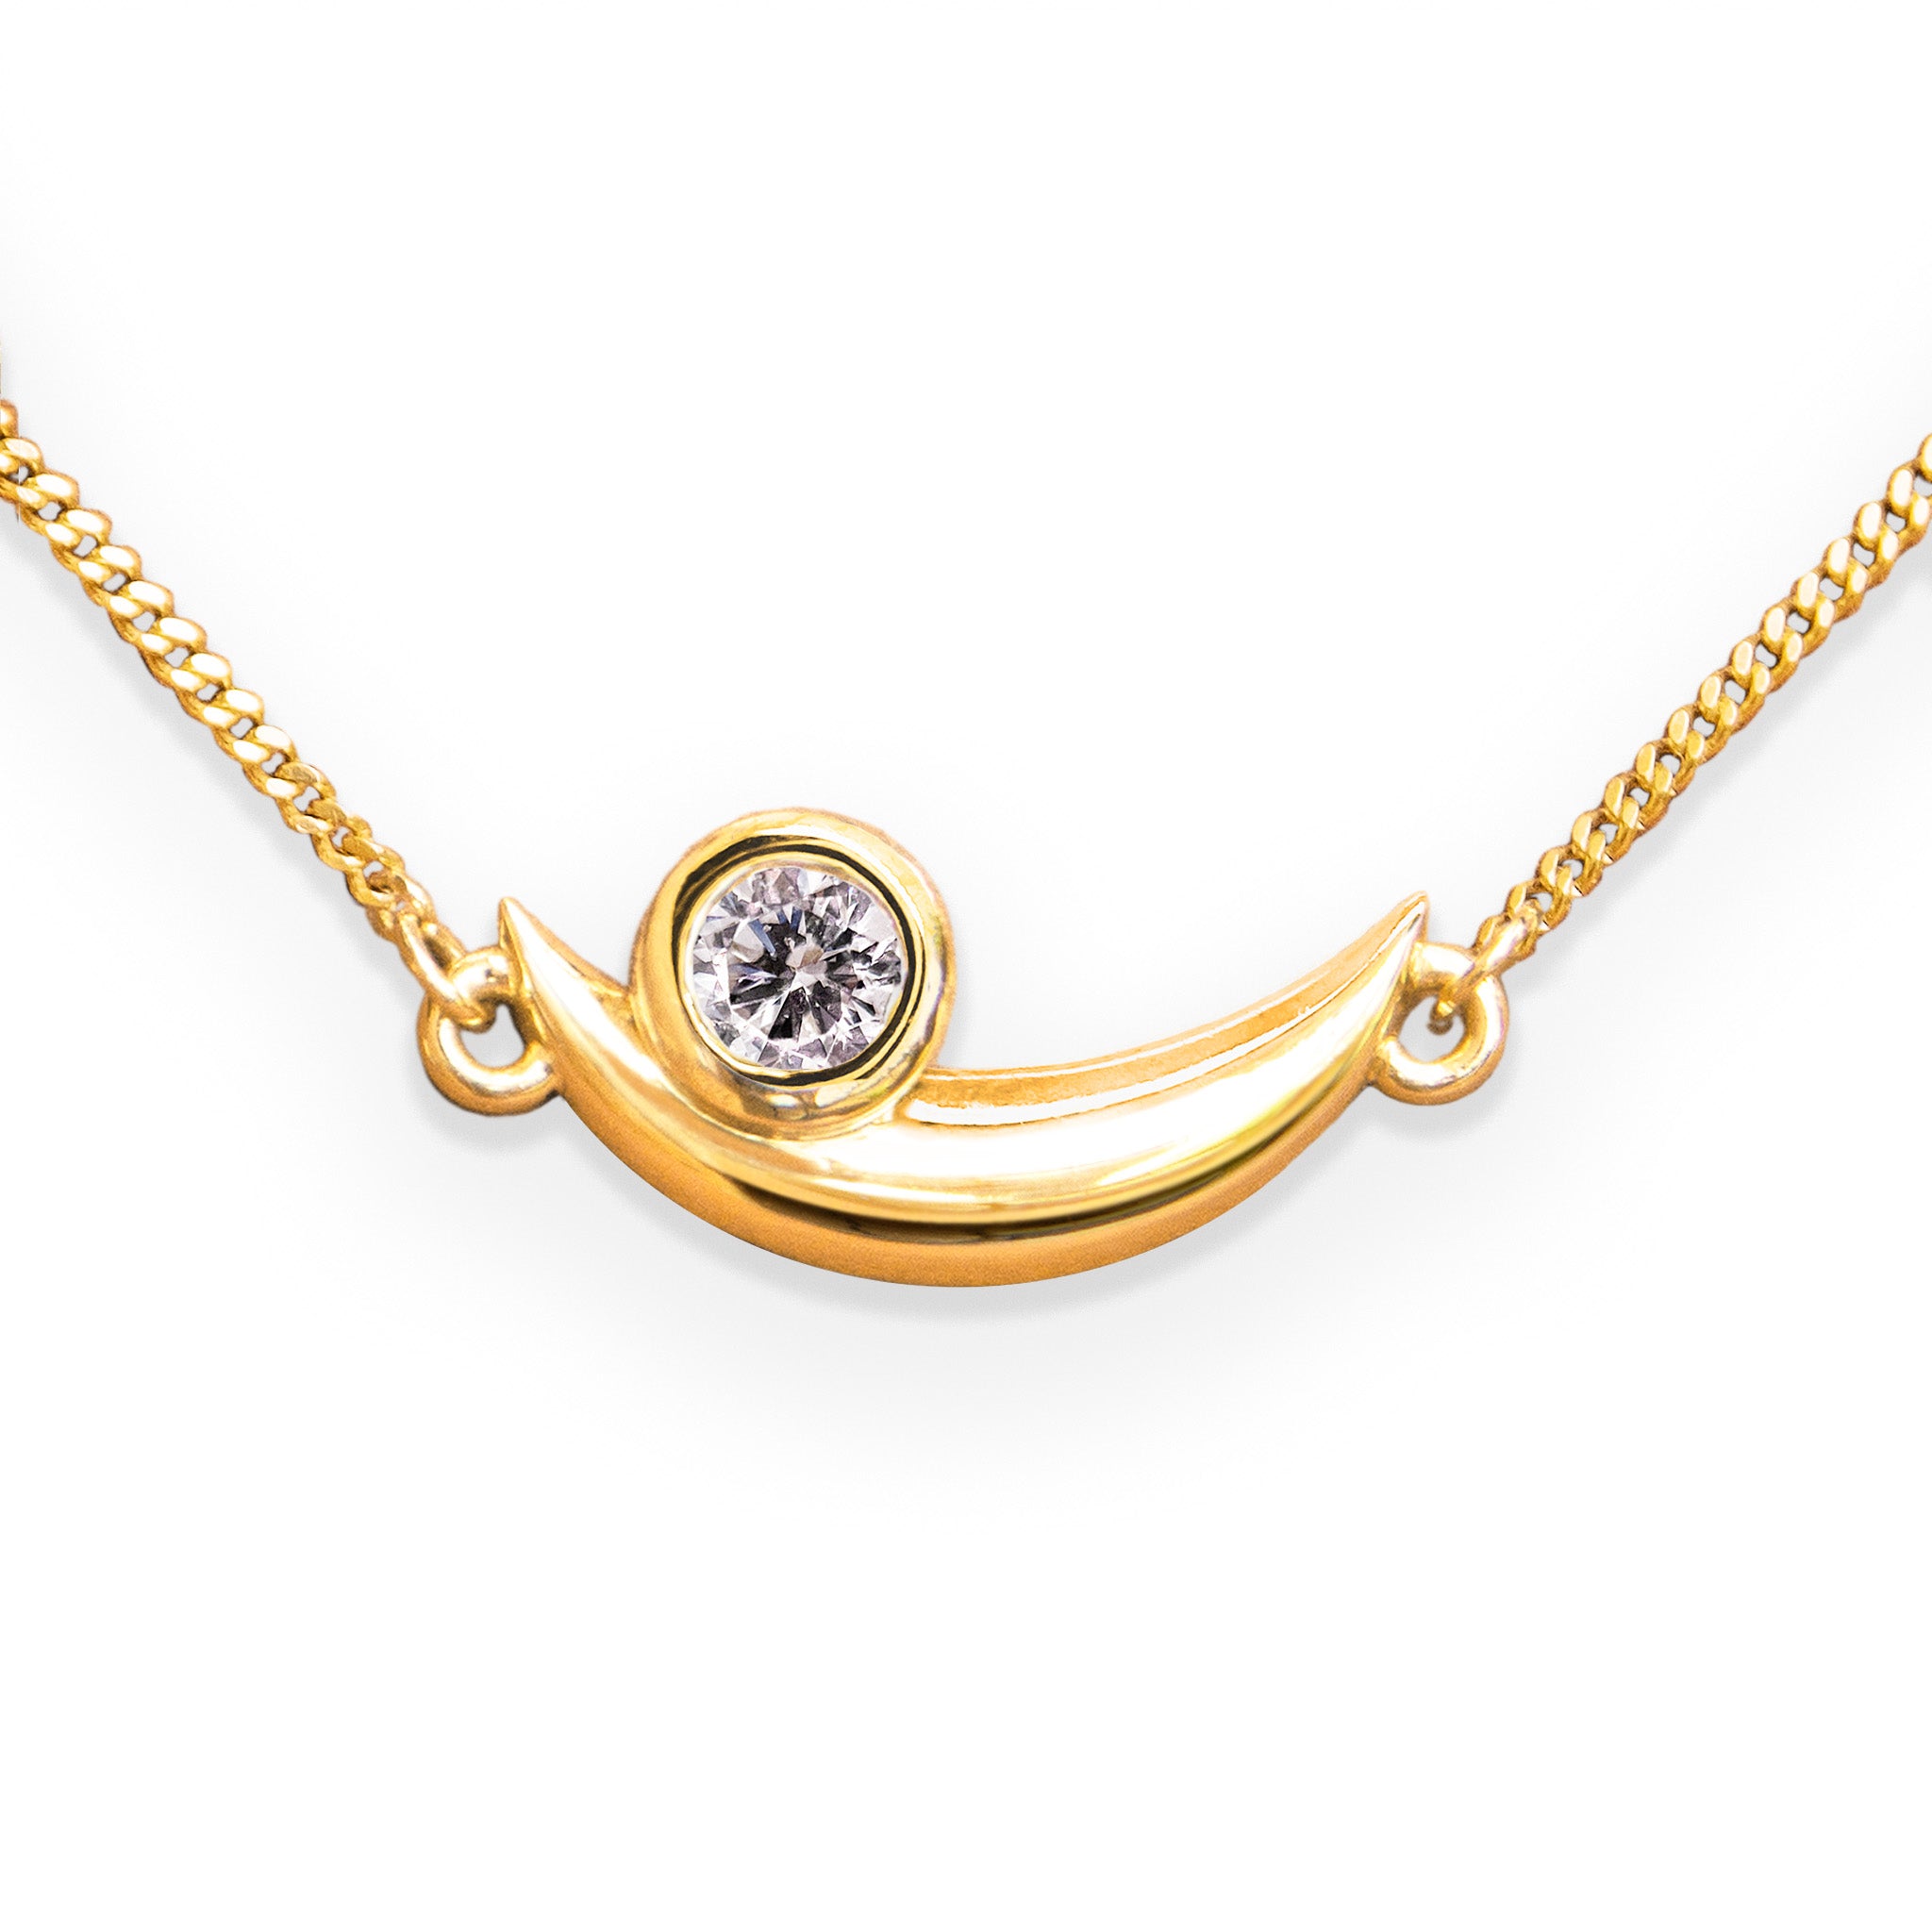 Solid yellow gold diamond pendant necklace